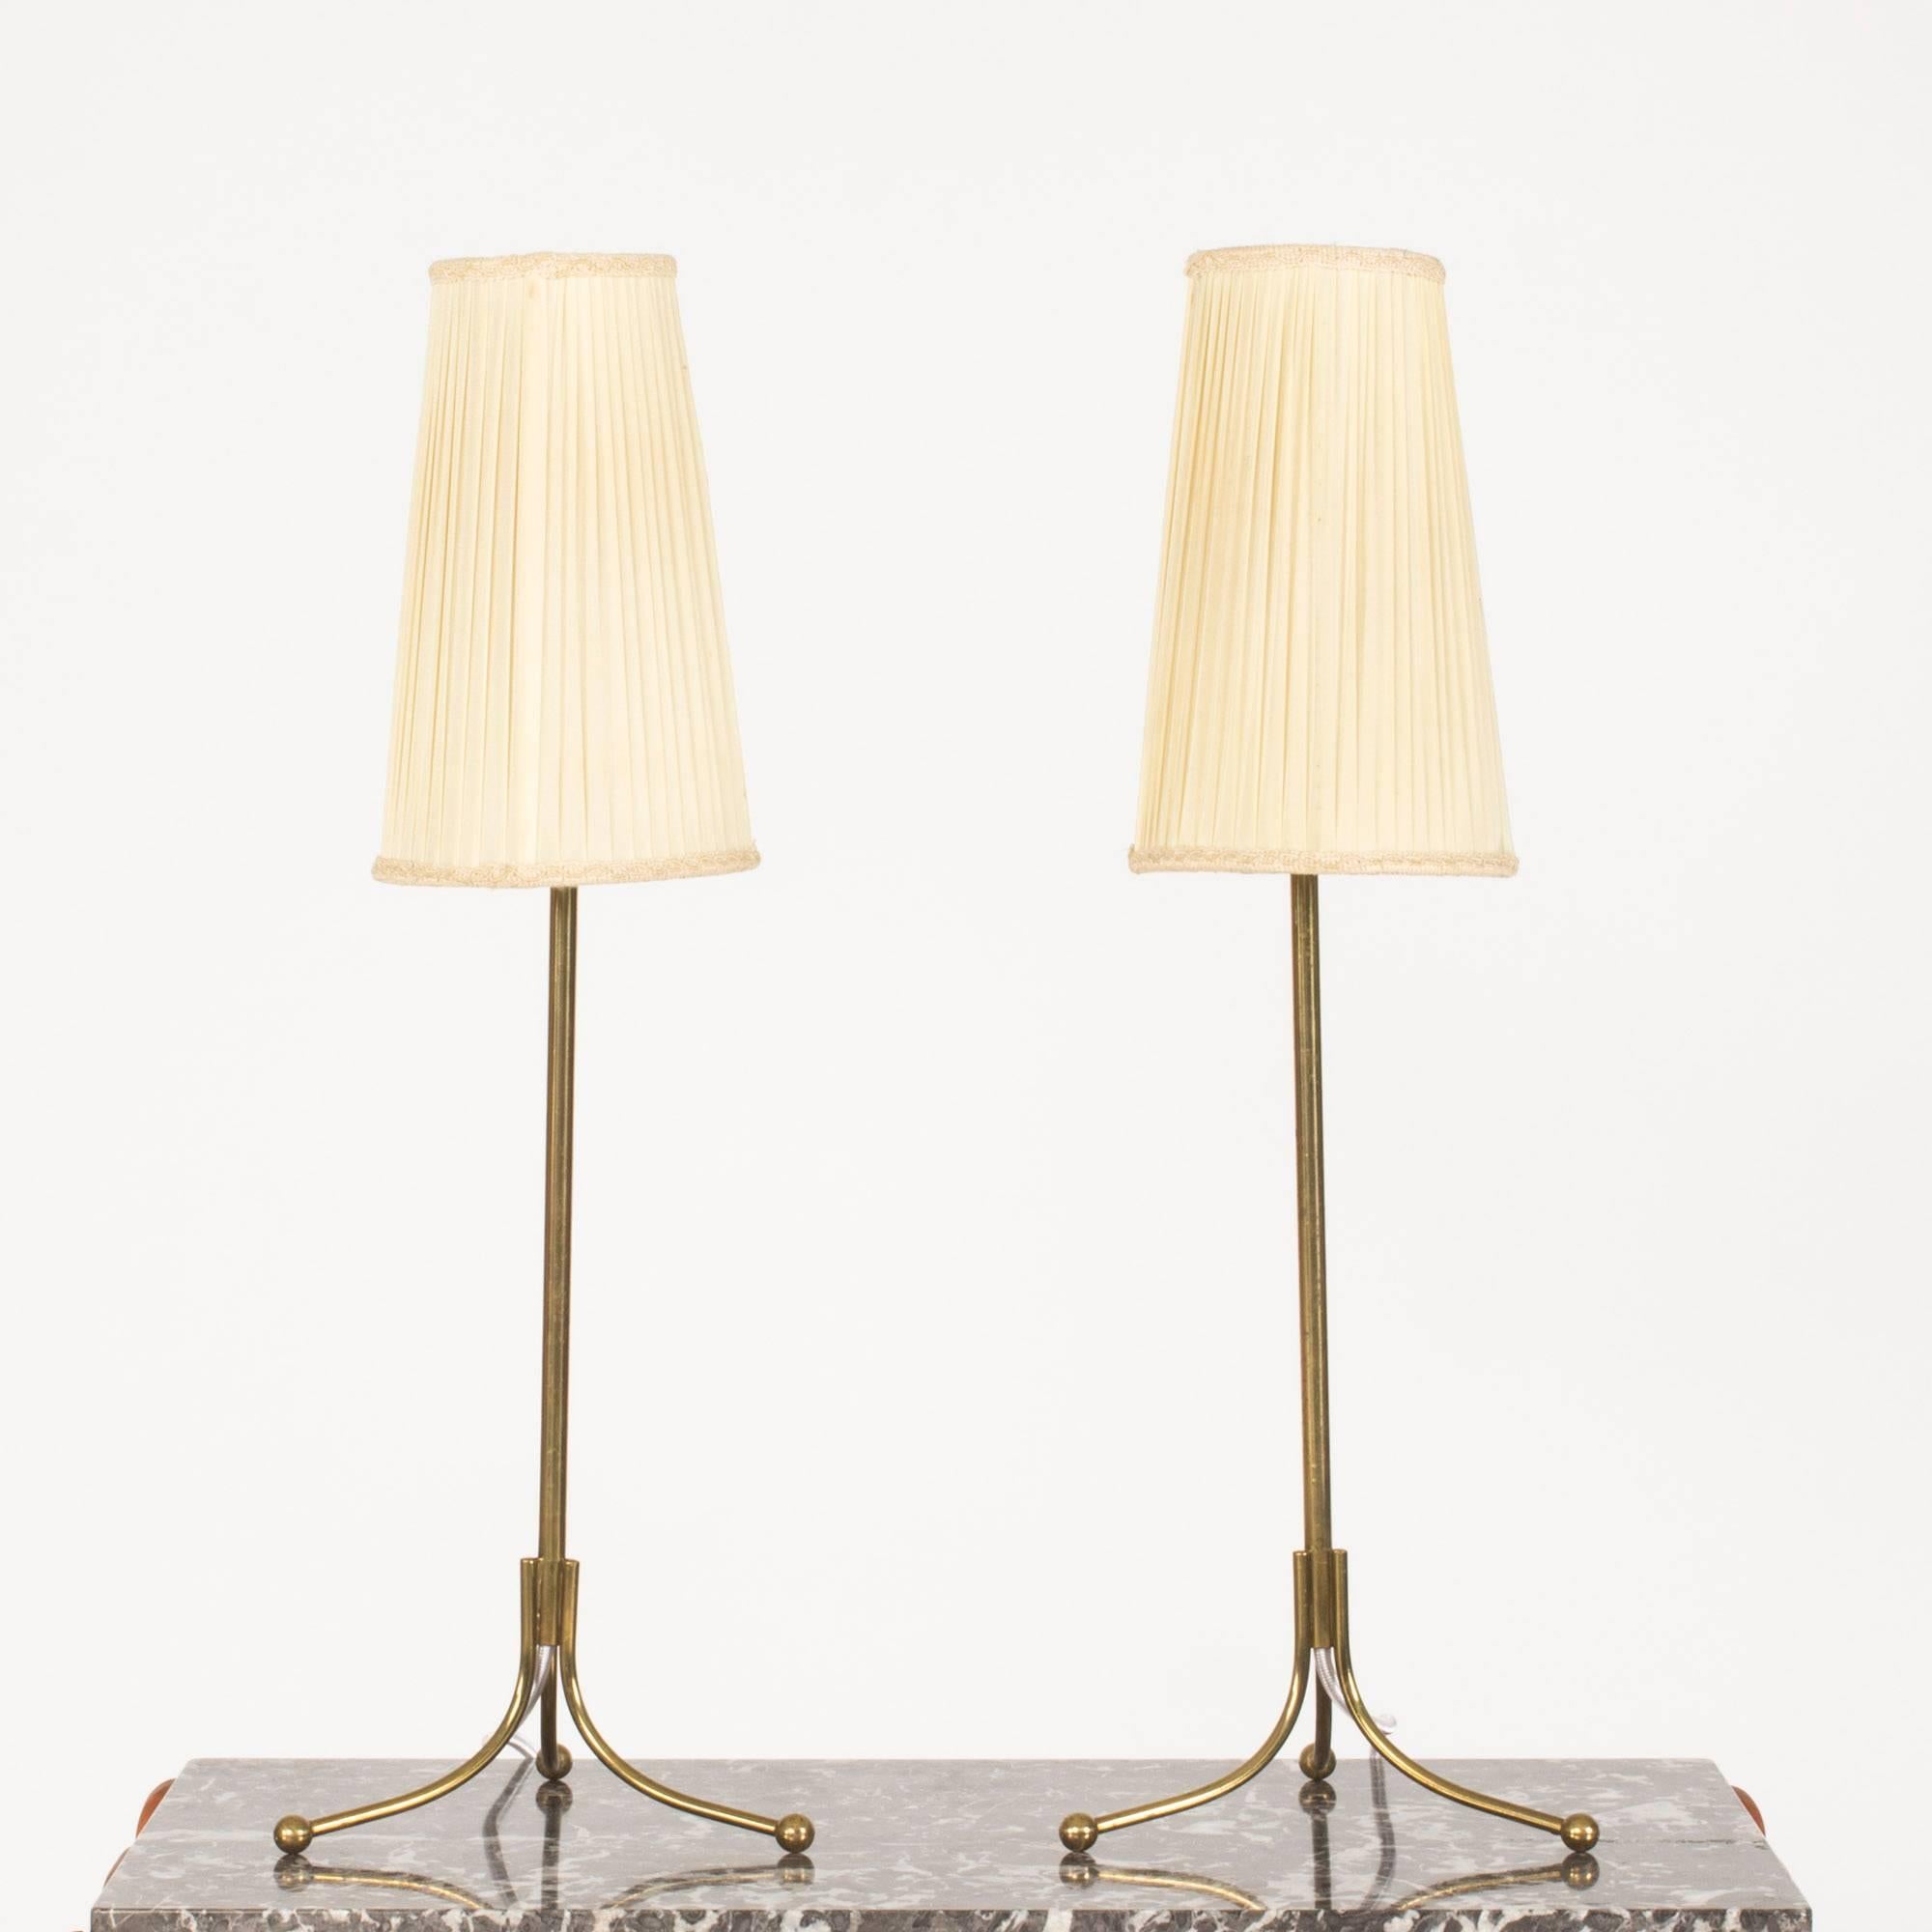 Very rare table lamps by Josef Frank, made in a small number in the 1930s. The model is a table size version of the 2326 floor lamp by Frank. The lamps remain in original condition except for the wiring, which has been remade. Original shades, can